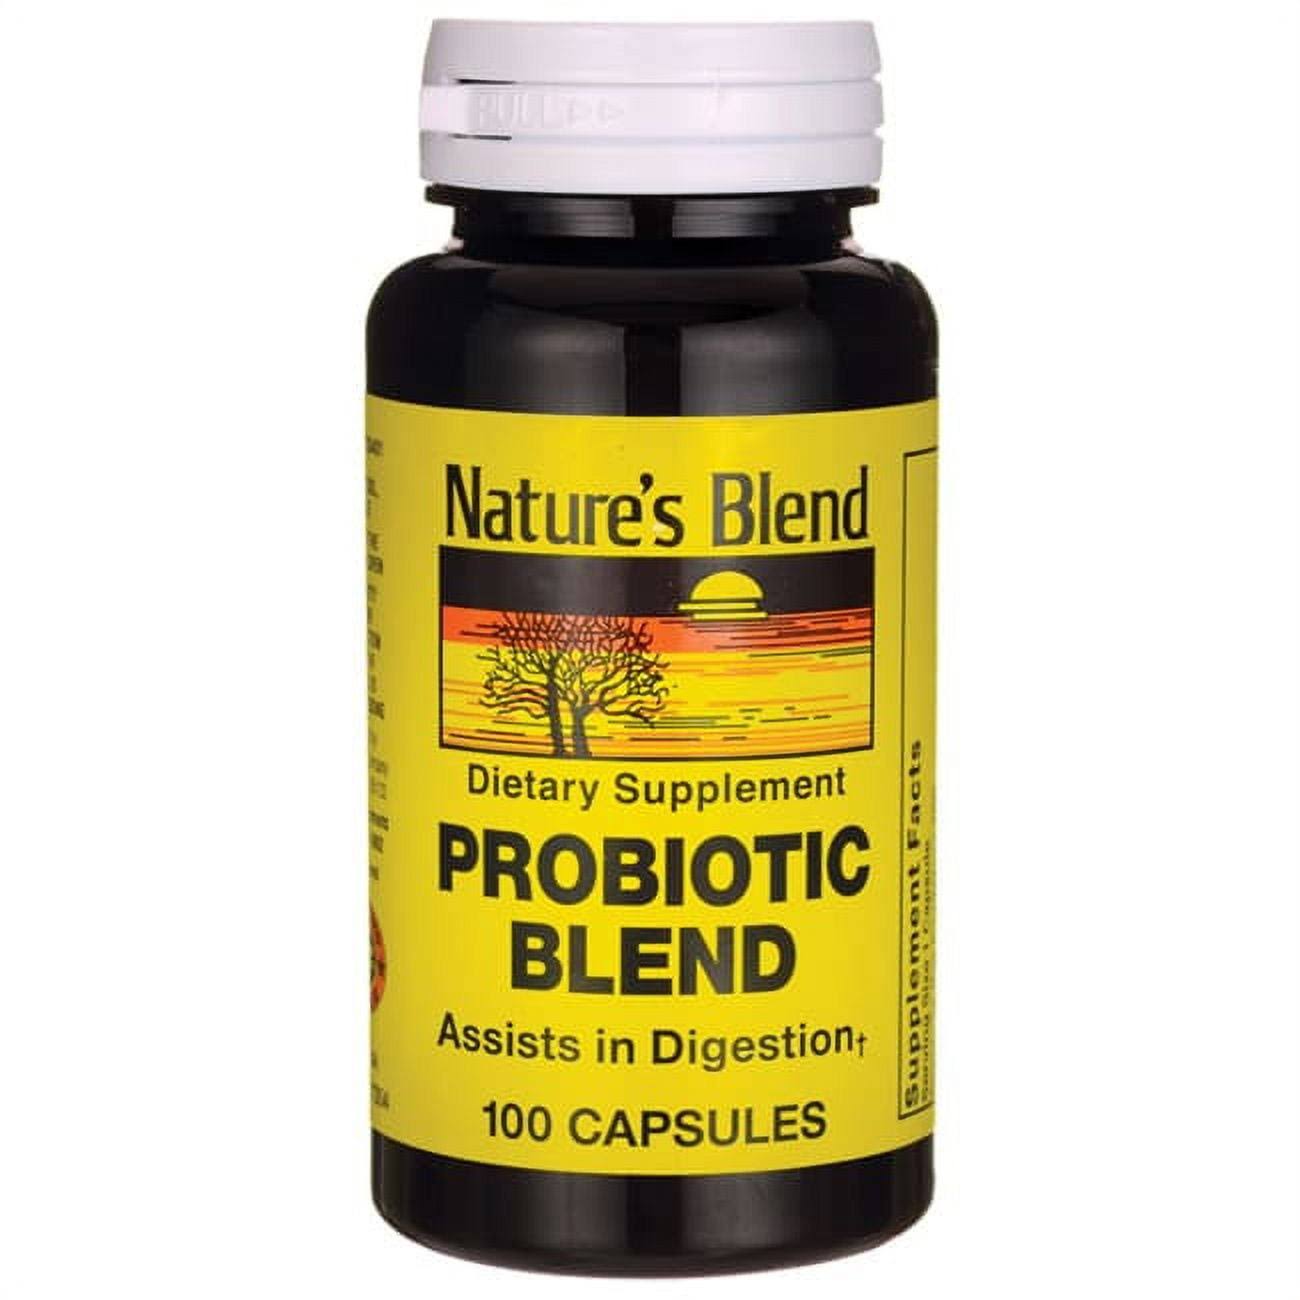 Nature's Blend Probiotic Blend Dietary Supplement - 100 Capsules